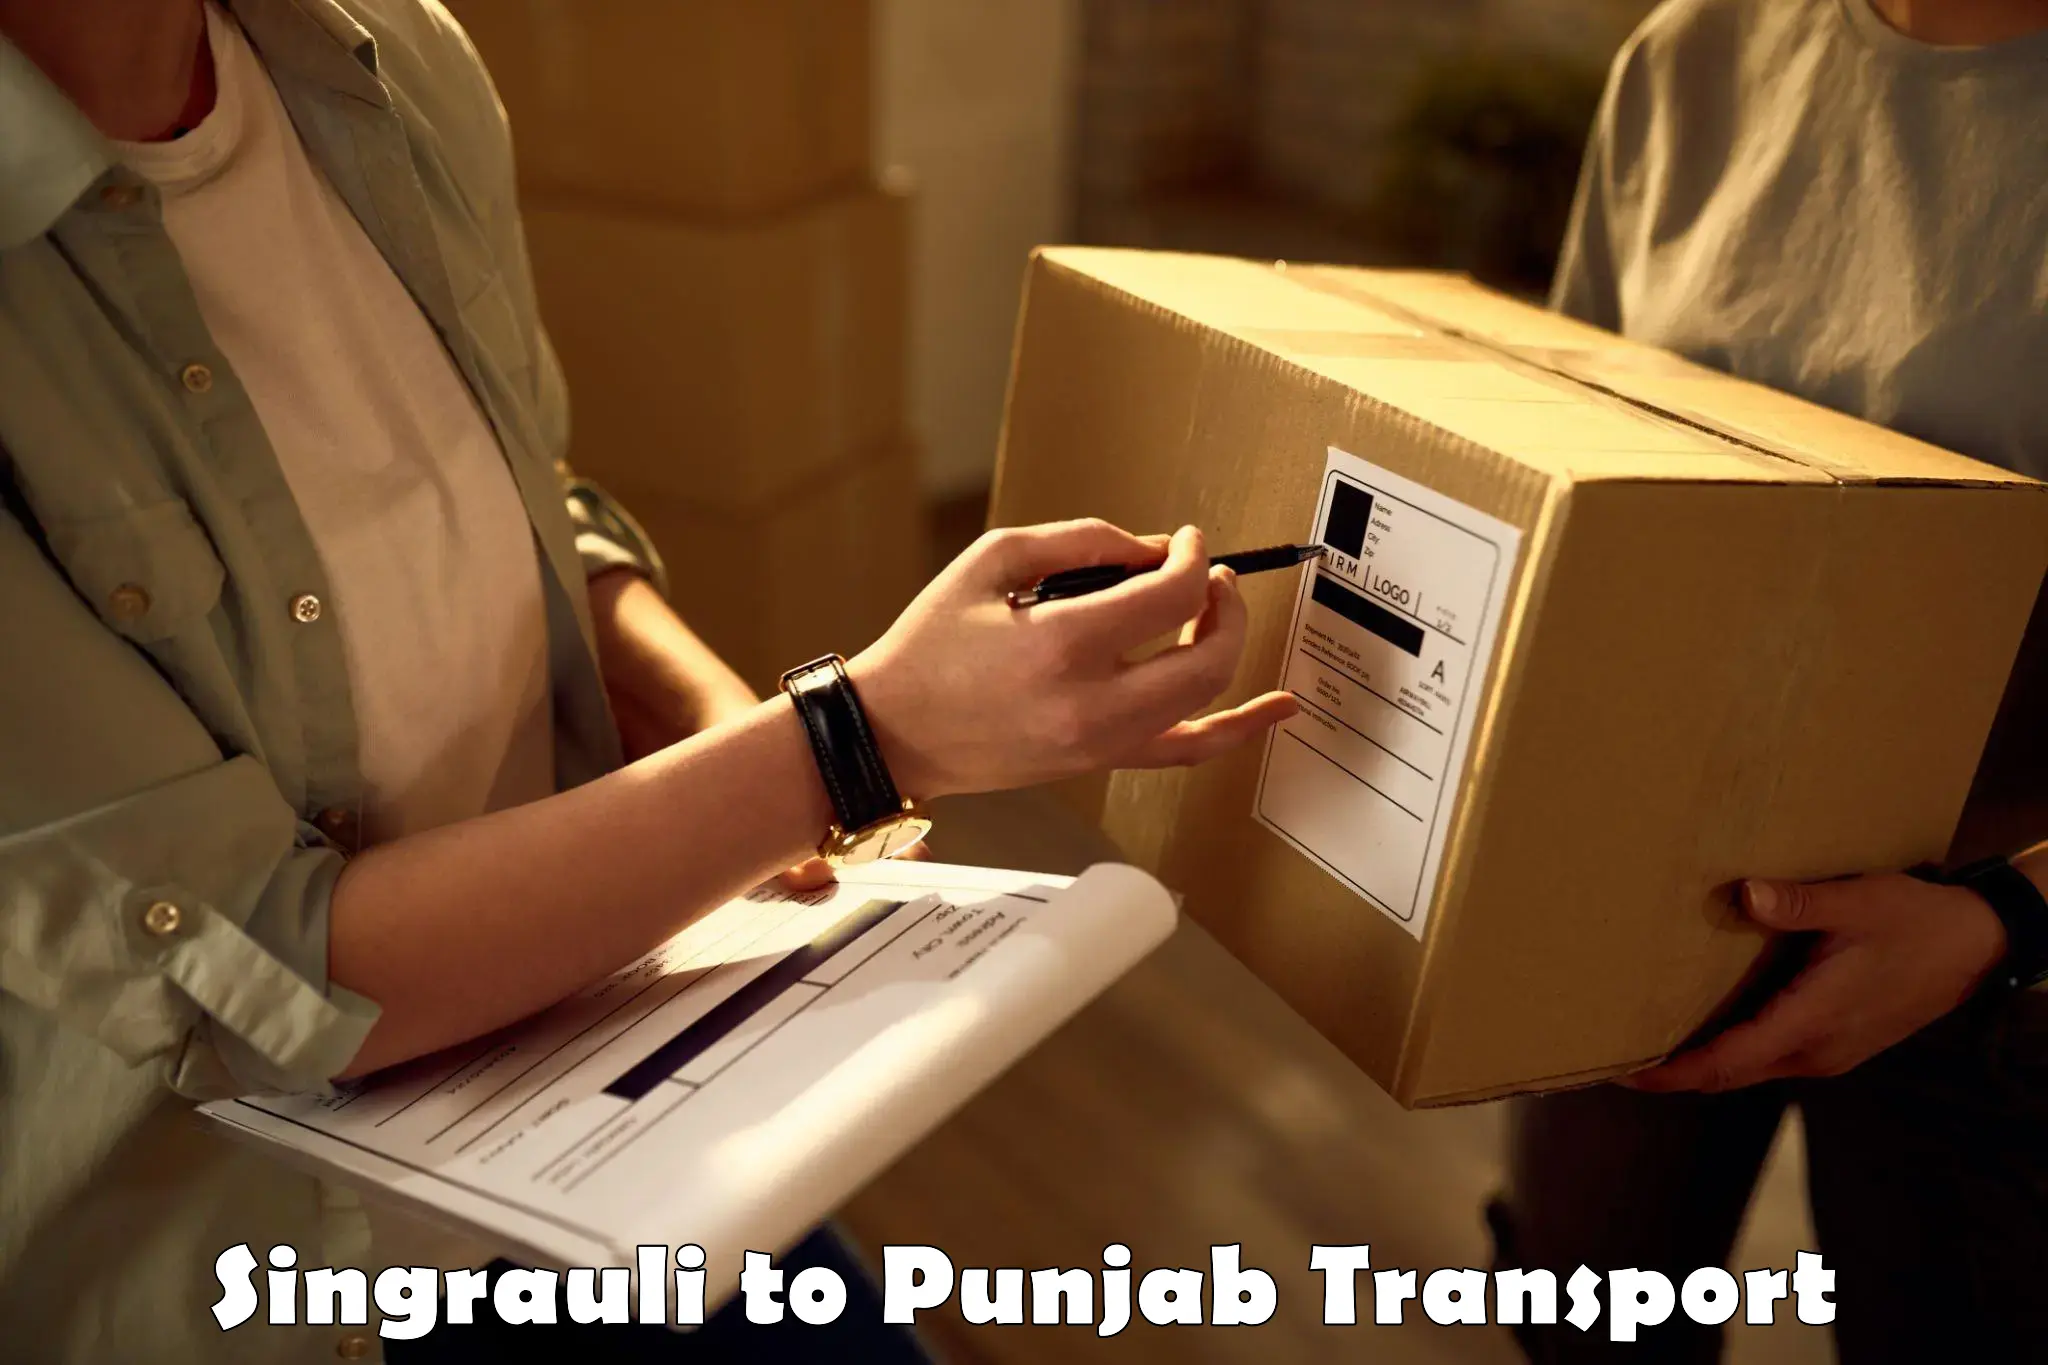 Pick up transport service Singrauli to Thapar Institute of Engineering and Technology Patiala